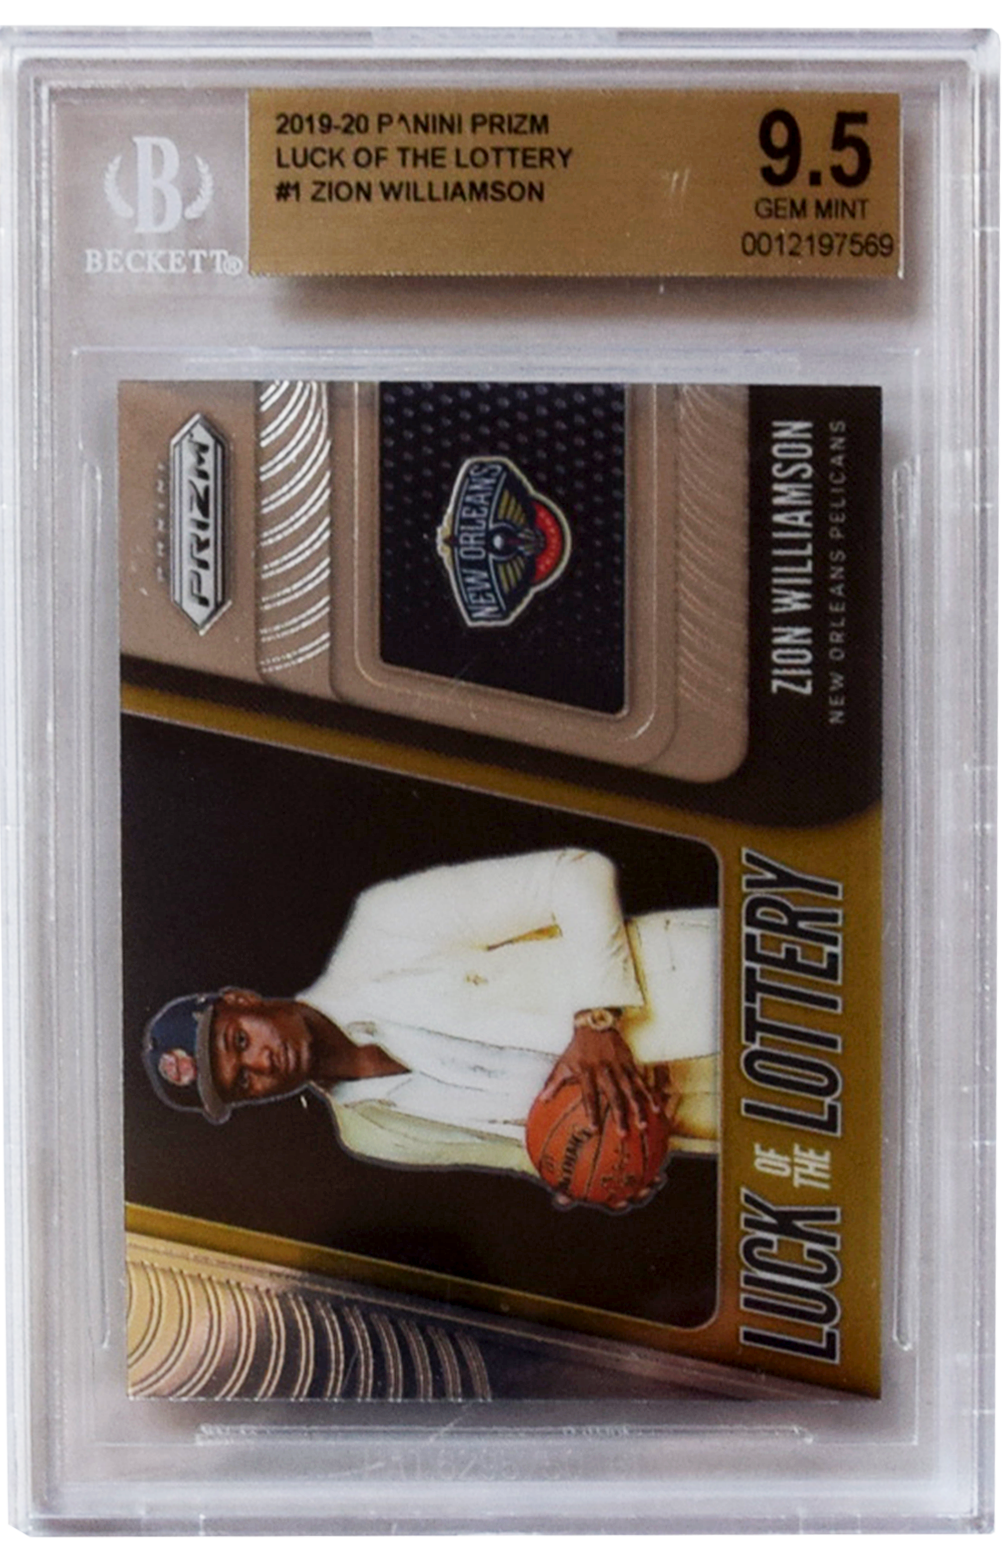 2019-20 Panini Prizm - Luck of the Lottery - #1 Zion Wililamson BGS 9.5 Gem Mint